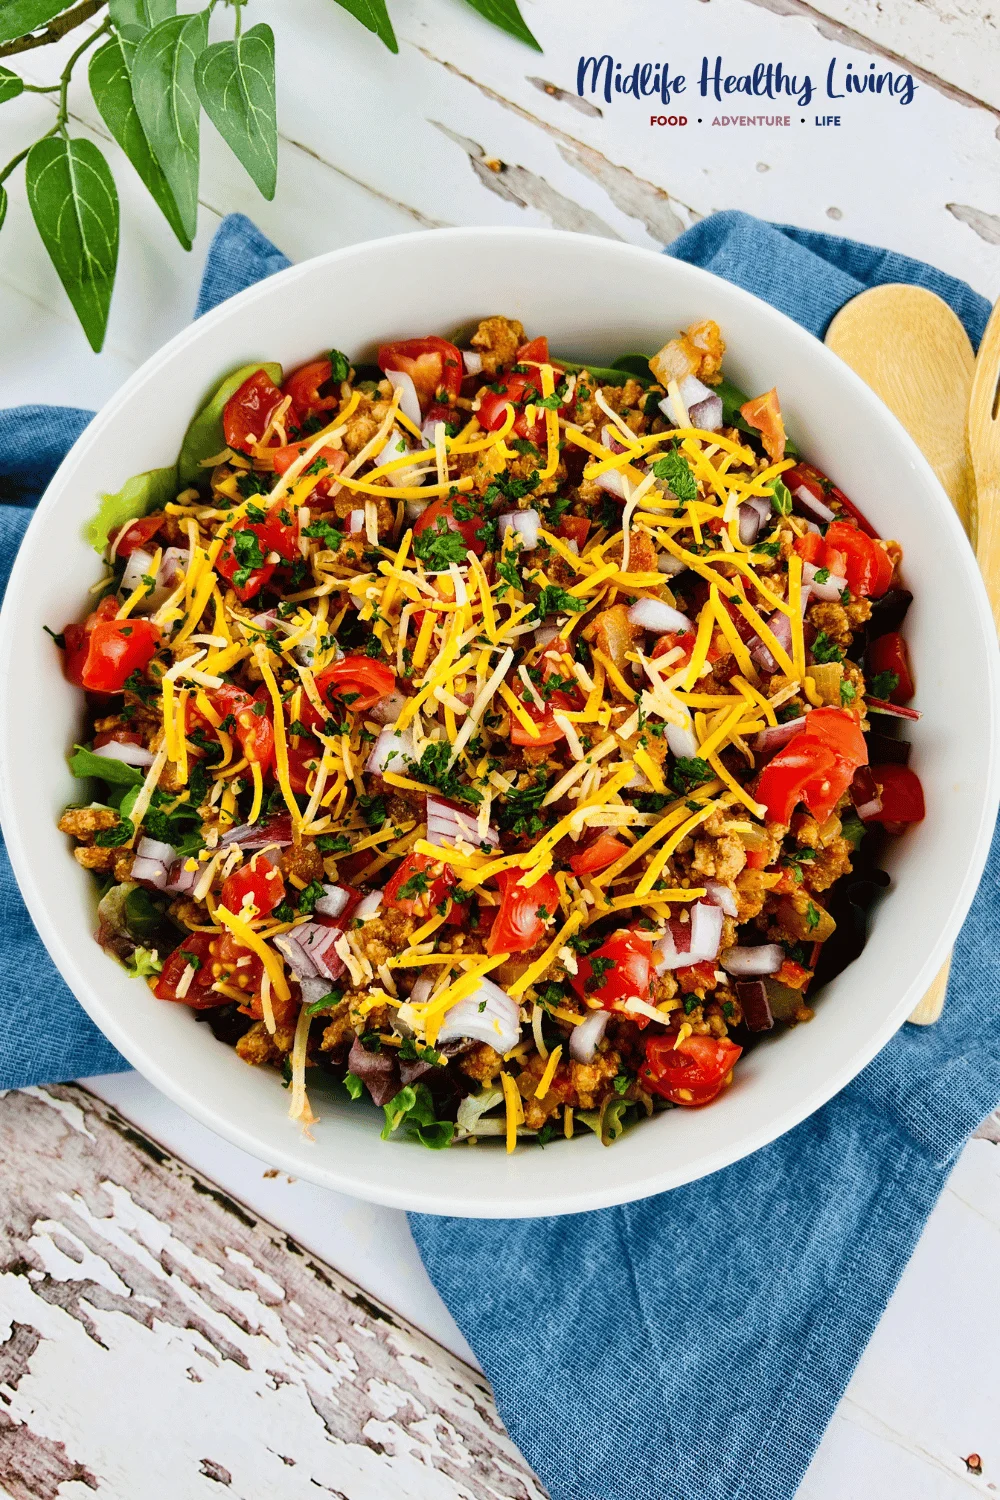 Weight watchers friendly taco salad recipe with cheese